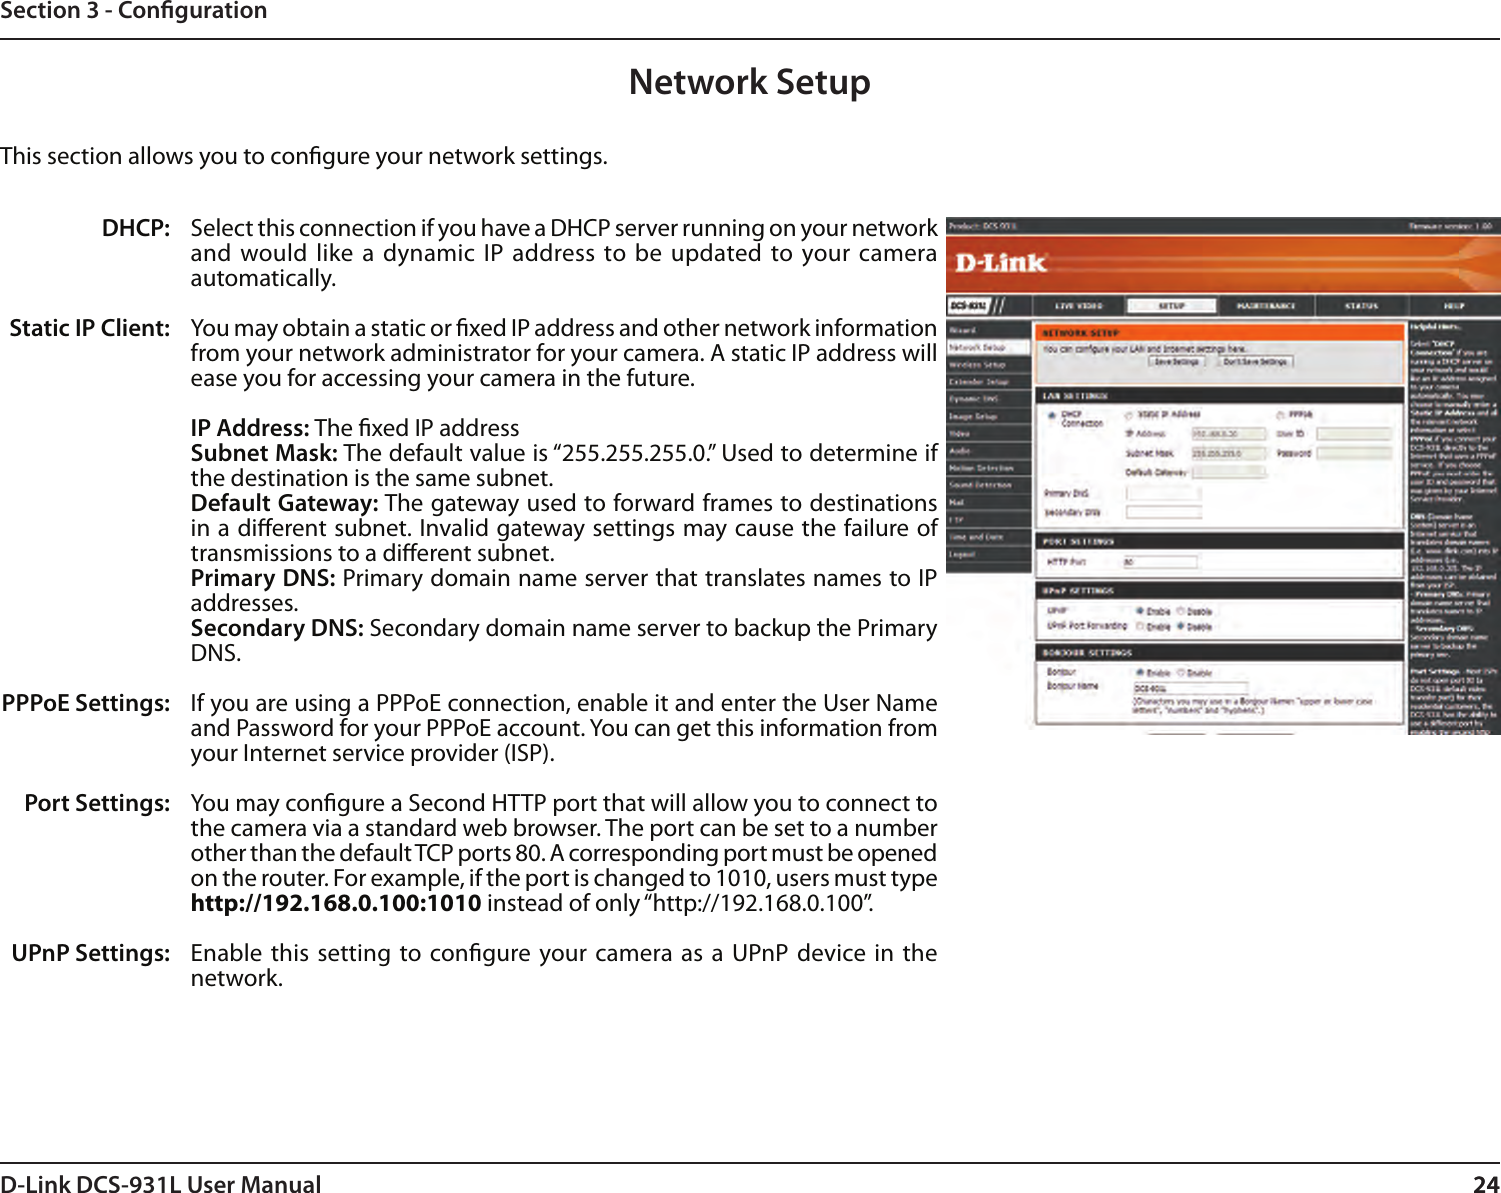 24D-Link DCS-931L User Manual 24Section 3 - CongurationNetwork SetupSelect this connection if you have a DHCP server running on your network and would like  a dynamic  IP address to  be updated to your camera automatically. You may obtain a static or xed IP address and other network information from your network administrator for your camera. A static IP address will ease you for accessing your camera in the future.IP Address: The xed IP addressSubnet Mask: The default value is “255.255.255.0.” Used to determine if the destination is the same subnet.Default Gateway: The gateway used to forward frames to destinations in a dierent subnet. Invalid gateway settings may cause the failure of transmissions to a dierent subnet.Primary DNS: Primary domain name server that translates names to IP addresses.Secondary DNS: Secondary domain name server to backup the Primary DNS.If you are using a PPPoE connection, enable it and enter the User Name and Password for your PPPoE account. You can get this information from your Internet service provider (ISP).You may congure a Second HTTP port that will allow you to connect to the camera via a standard web browser. The port can be set to a number other than the default TCP ports 80. A corresponding port must be opened on the router. For example, if the port is changed to 1010, users must type http://192.168.0.100:1010 instead of only “http://192.168.0.100”. Enable this  setting to congure your camera as a  UPnP device in the network.DHCP:Static IP Client:PPPoE Settings:Port Settings:UPnP Settings:This section allows you to congure your network settings.